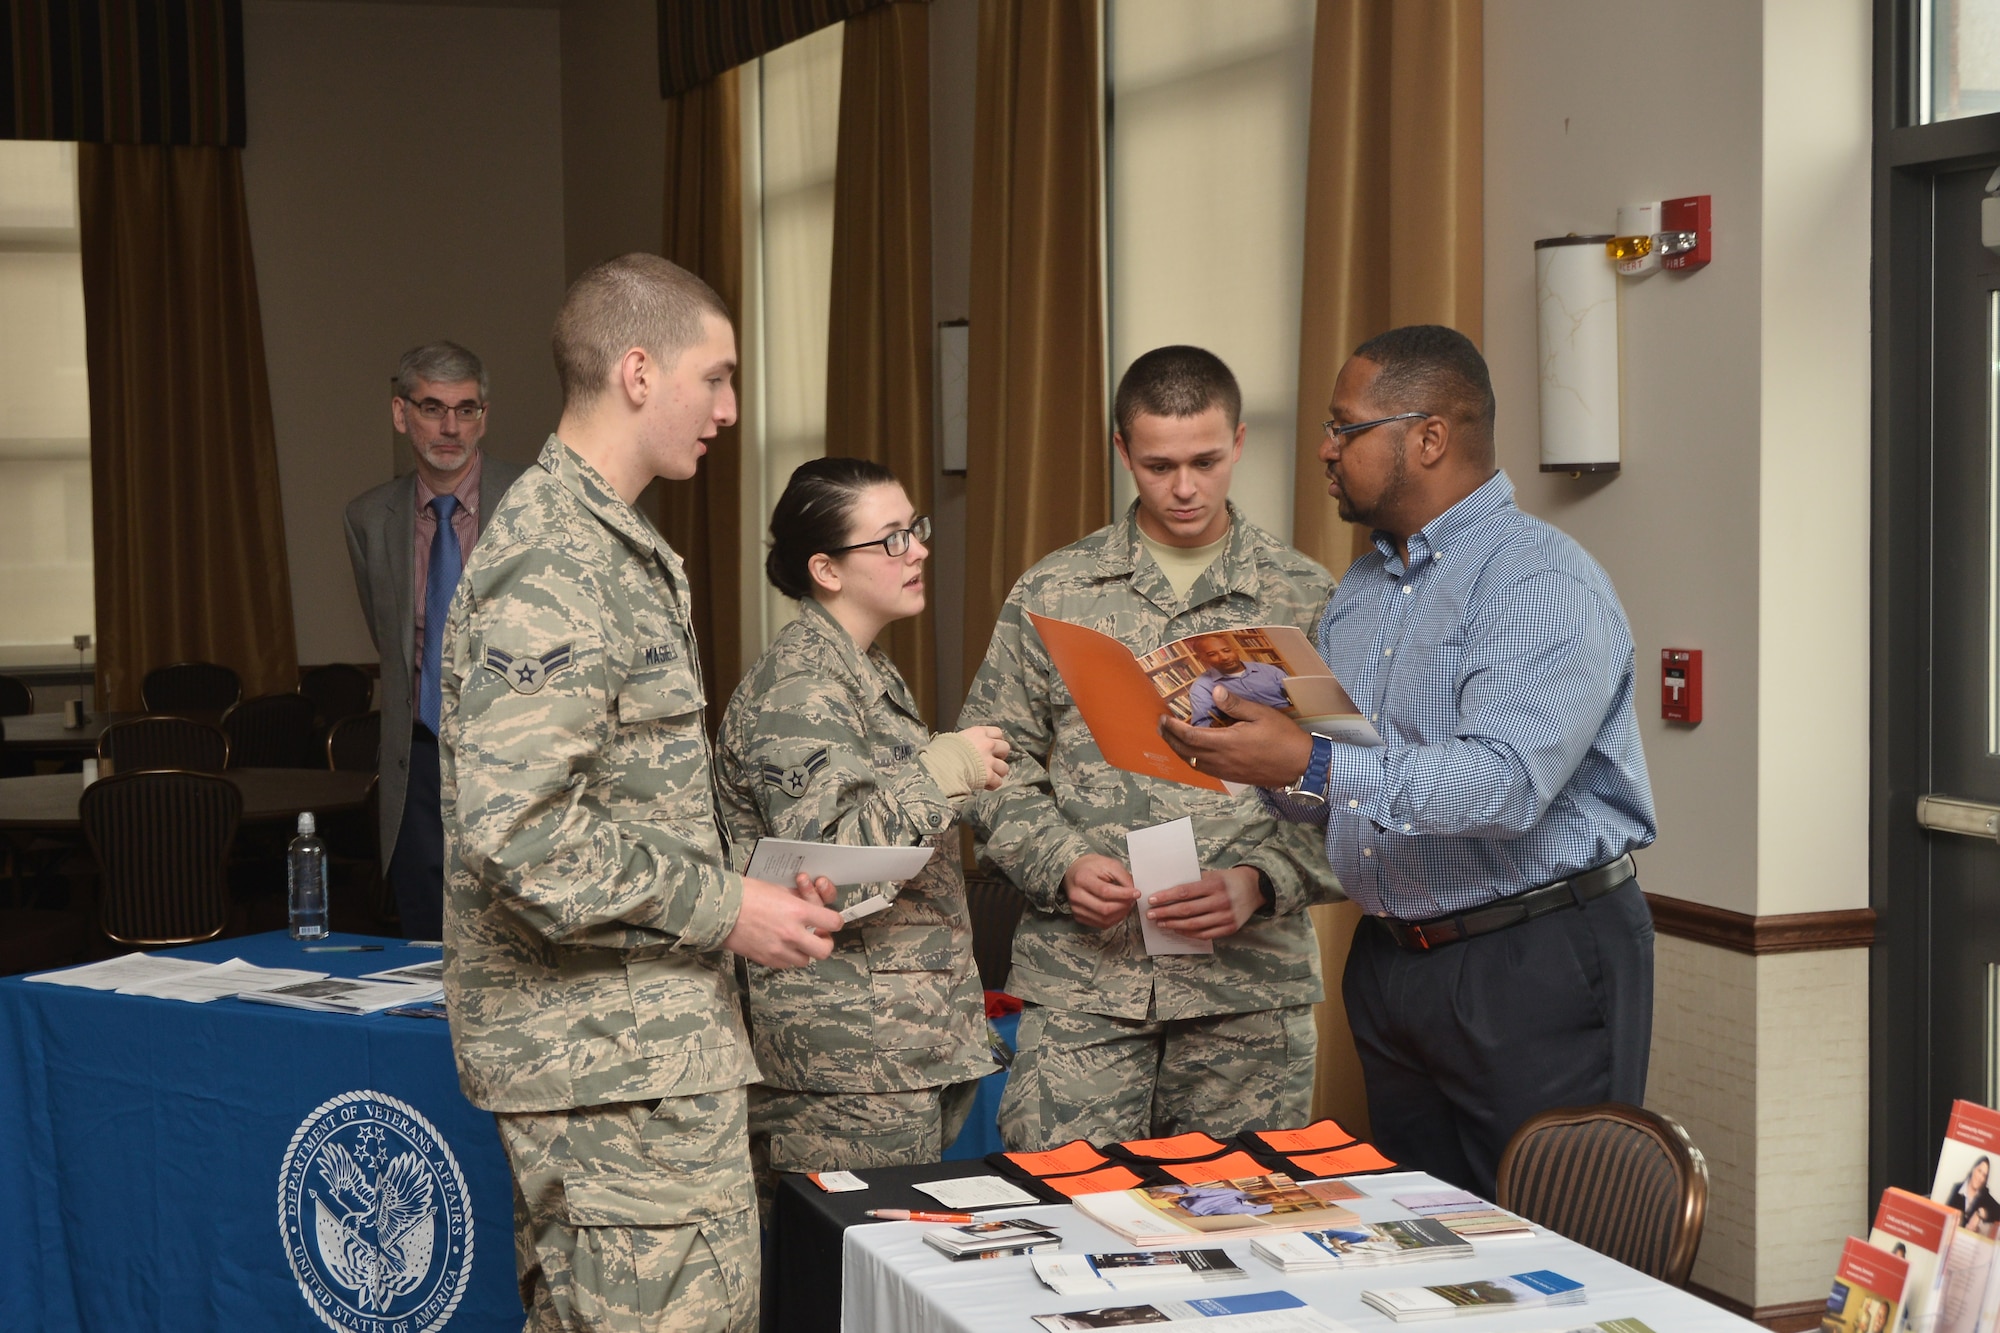 Airmen from the 107th Airlift Wing receive information from local colleges as part of a recruiting and retention education fair at the Niagara Falls Reserve Station March 21, 2015. (U.S. Air National Guard photo/Senior Master Sgt. Ray Lloyd.)